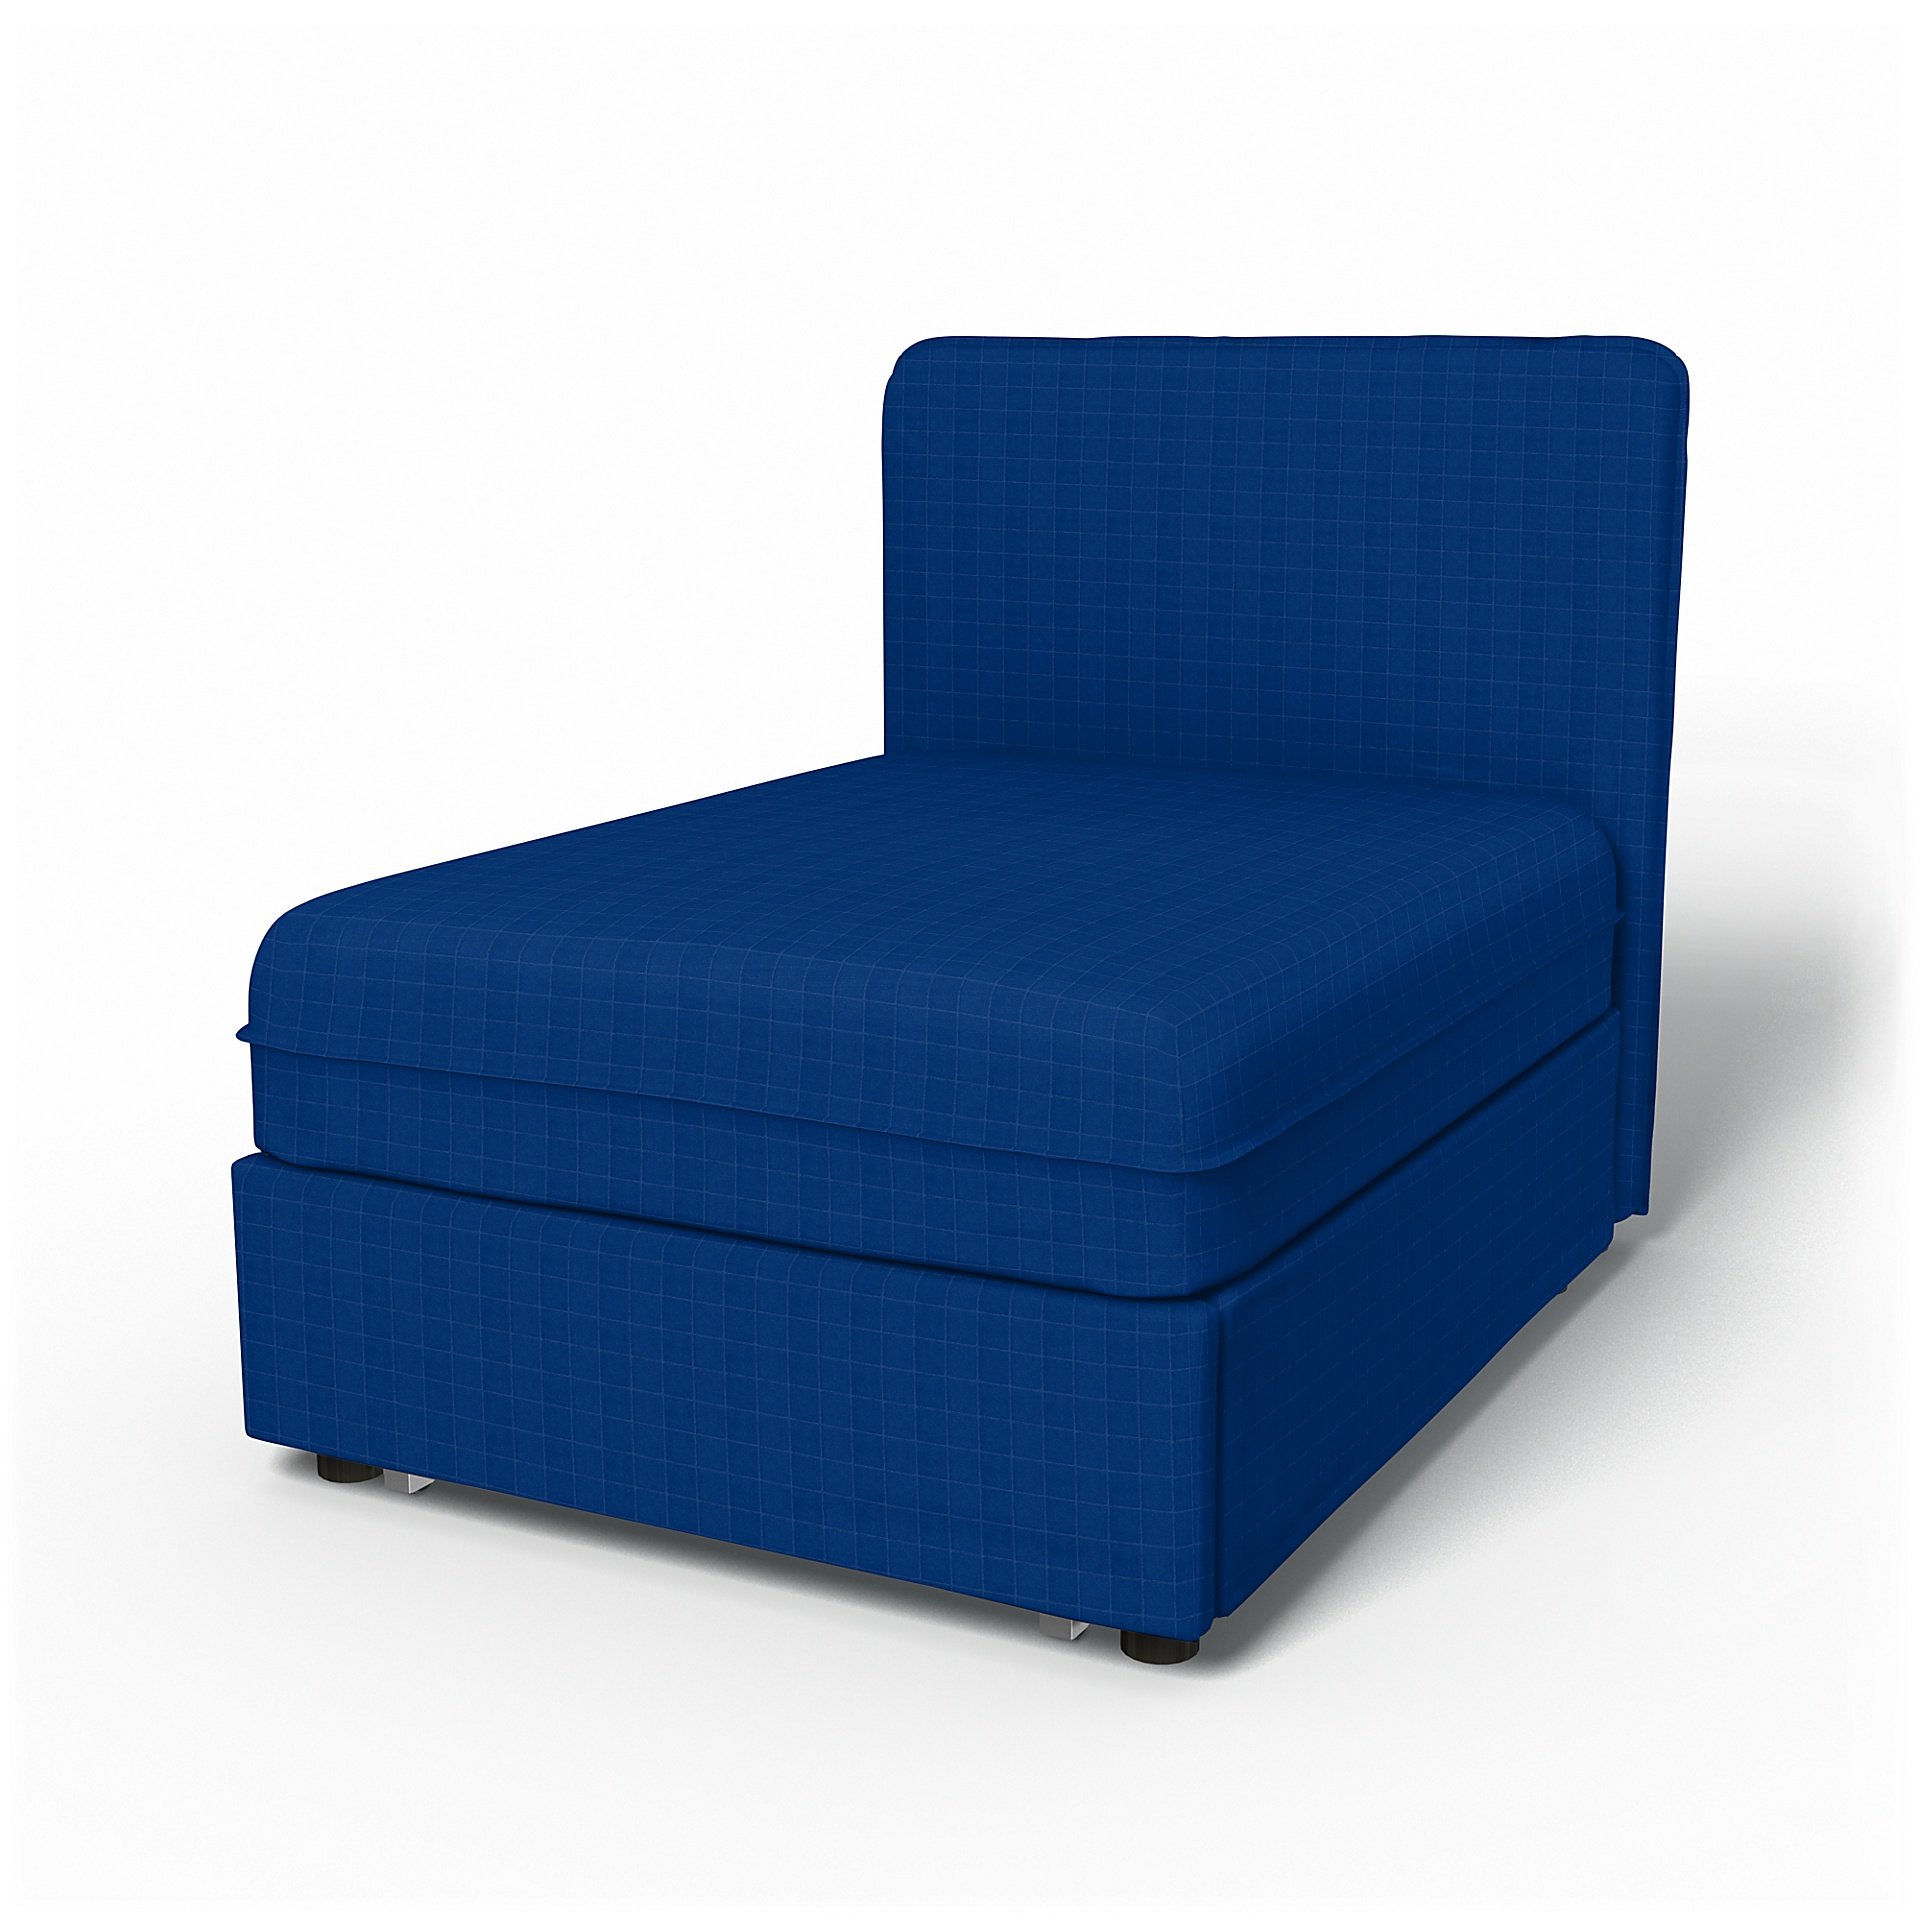 IKEA - Vallentuna Seat Module with Low Back Sofa Bed Cover 80x100 cm 32x39in, Lapis Blue, Velvet - B